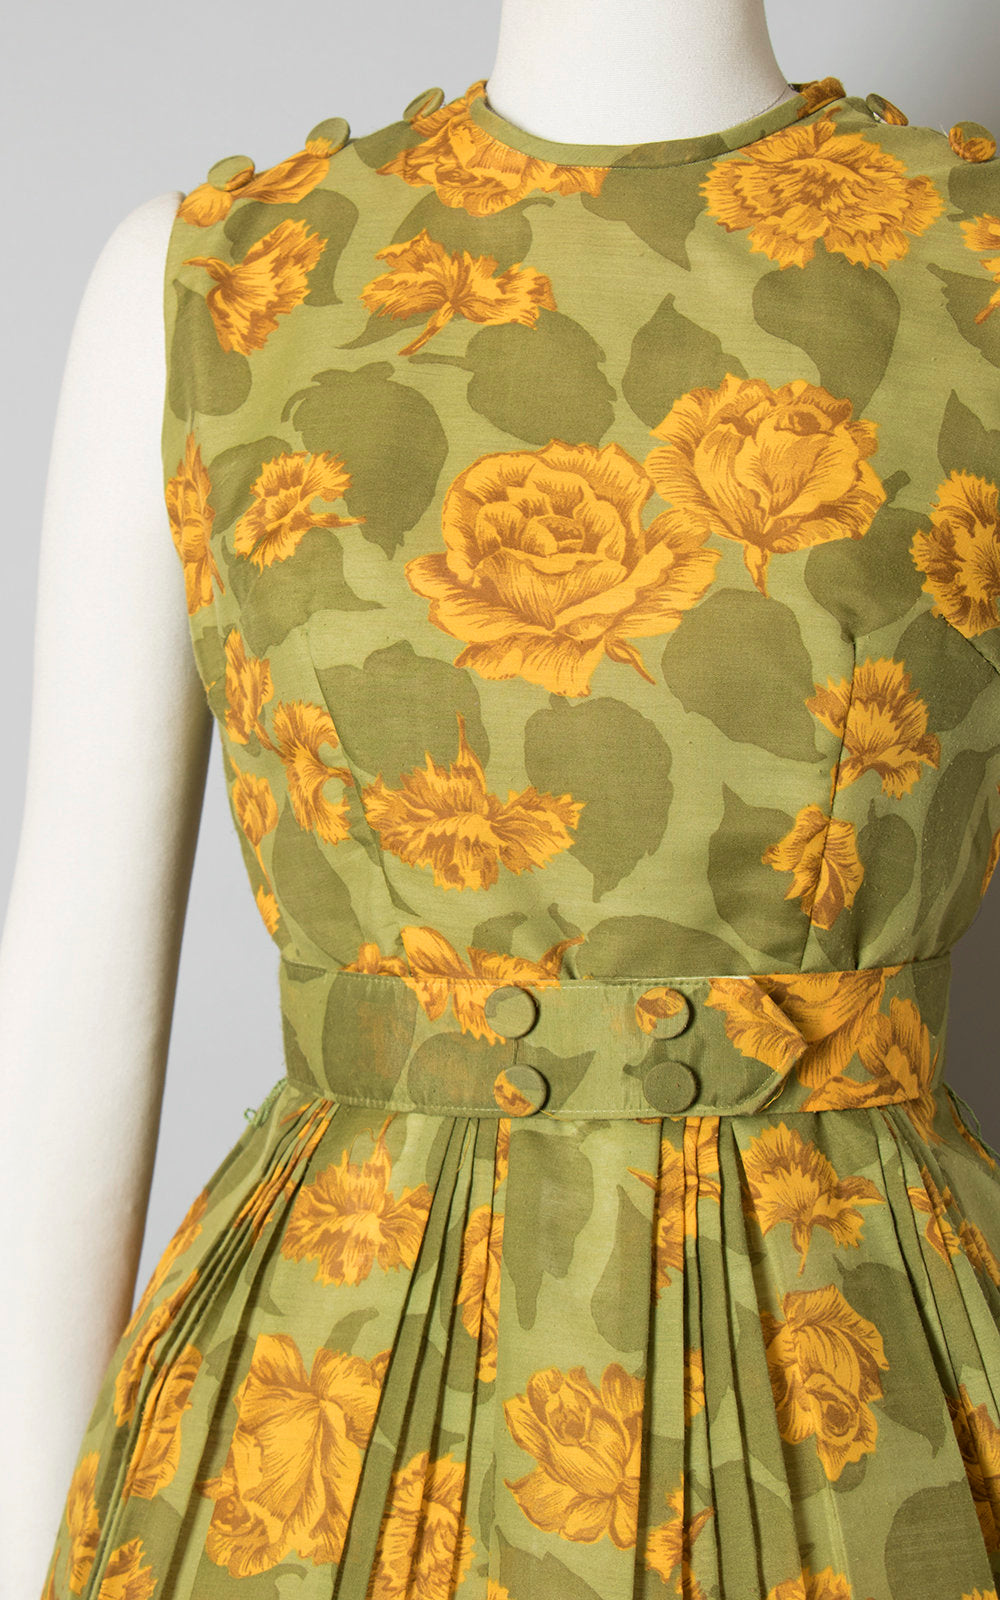 Vintage 1960s Dress | 60s Rose Floral Print Sundress Cotton Yellow Green Pleated Full Skirt Matching Belt Day Dress (small)